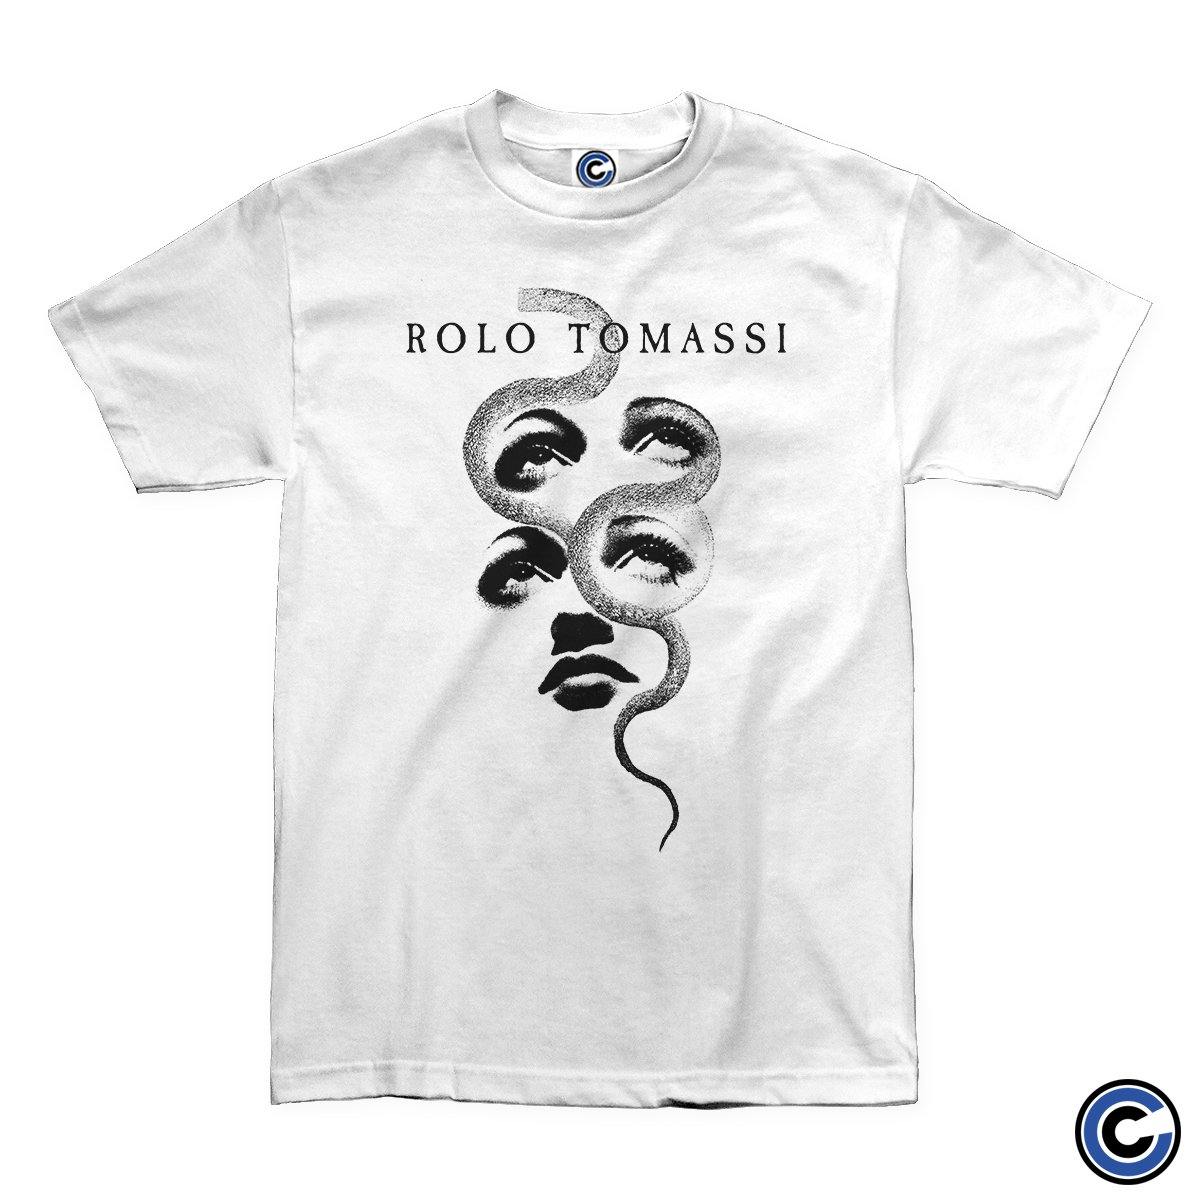 Buy – Rolo Tomassi "Visions" Shirt – Band & Music Merch – Cold Cuts Merch